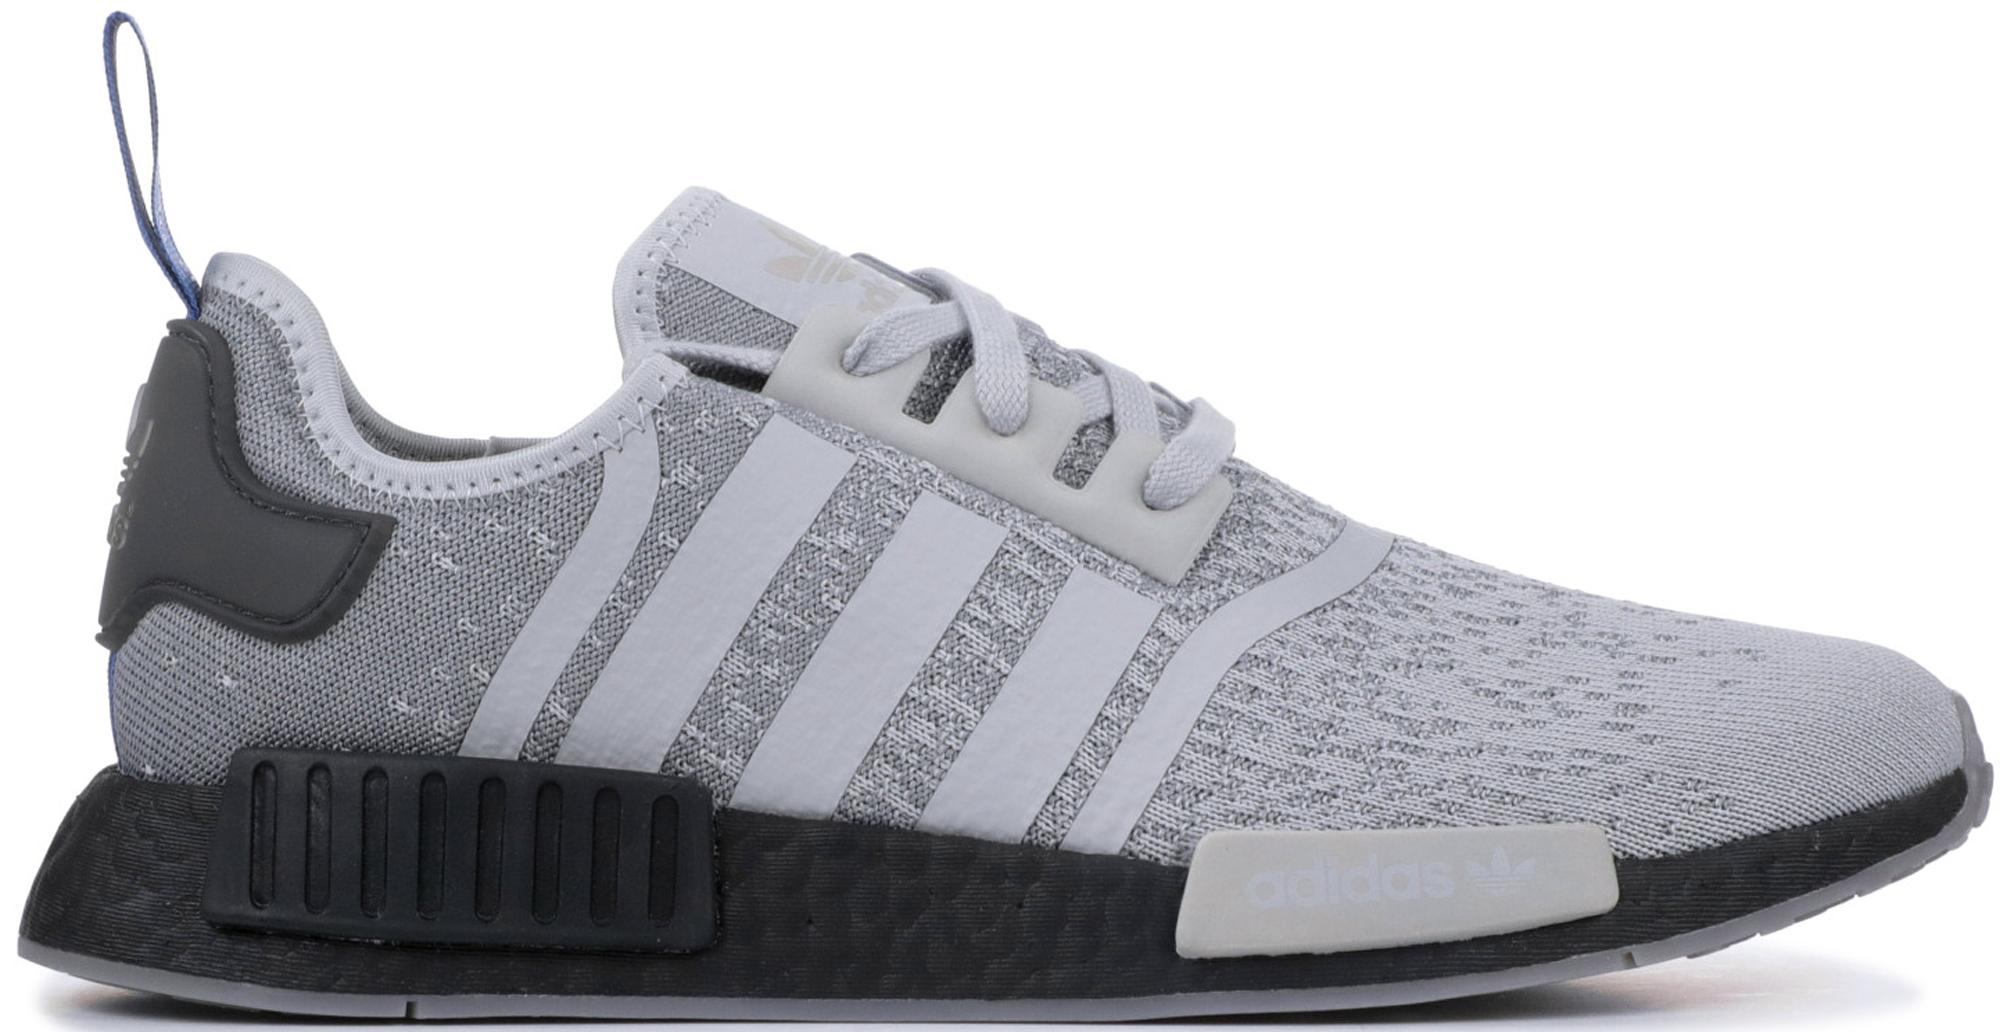 Adidas nmd r1 trace gray metallic HYPE SHOP SESSION